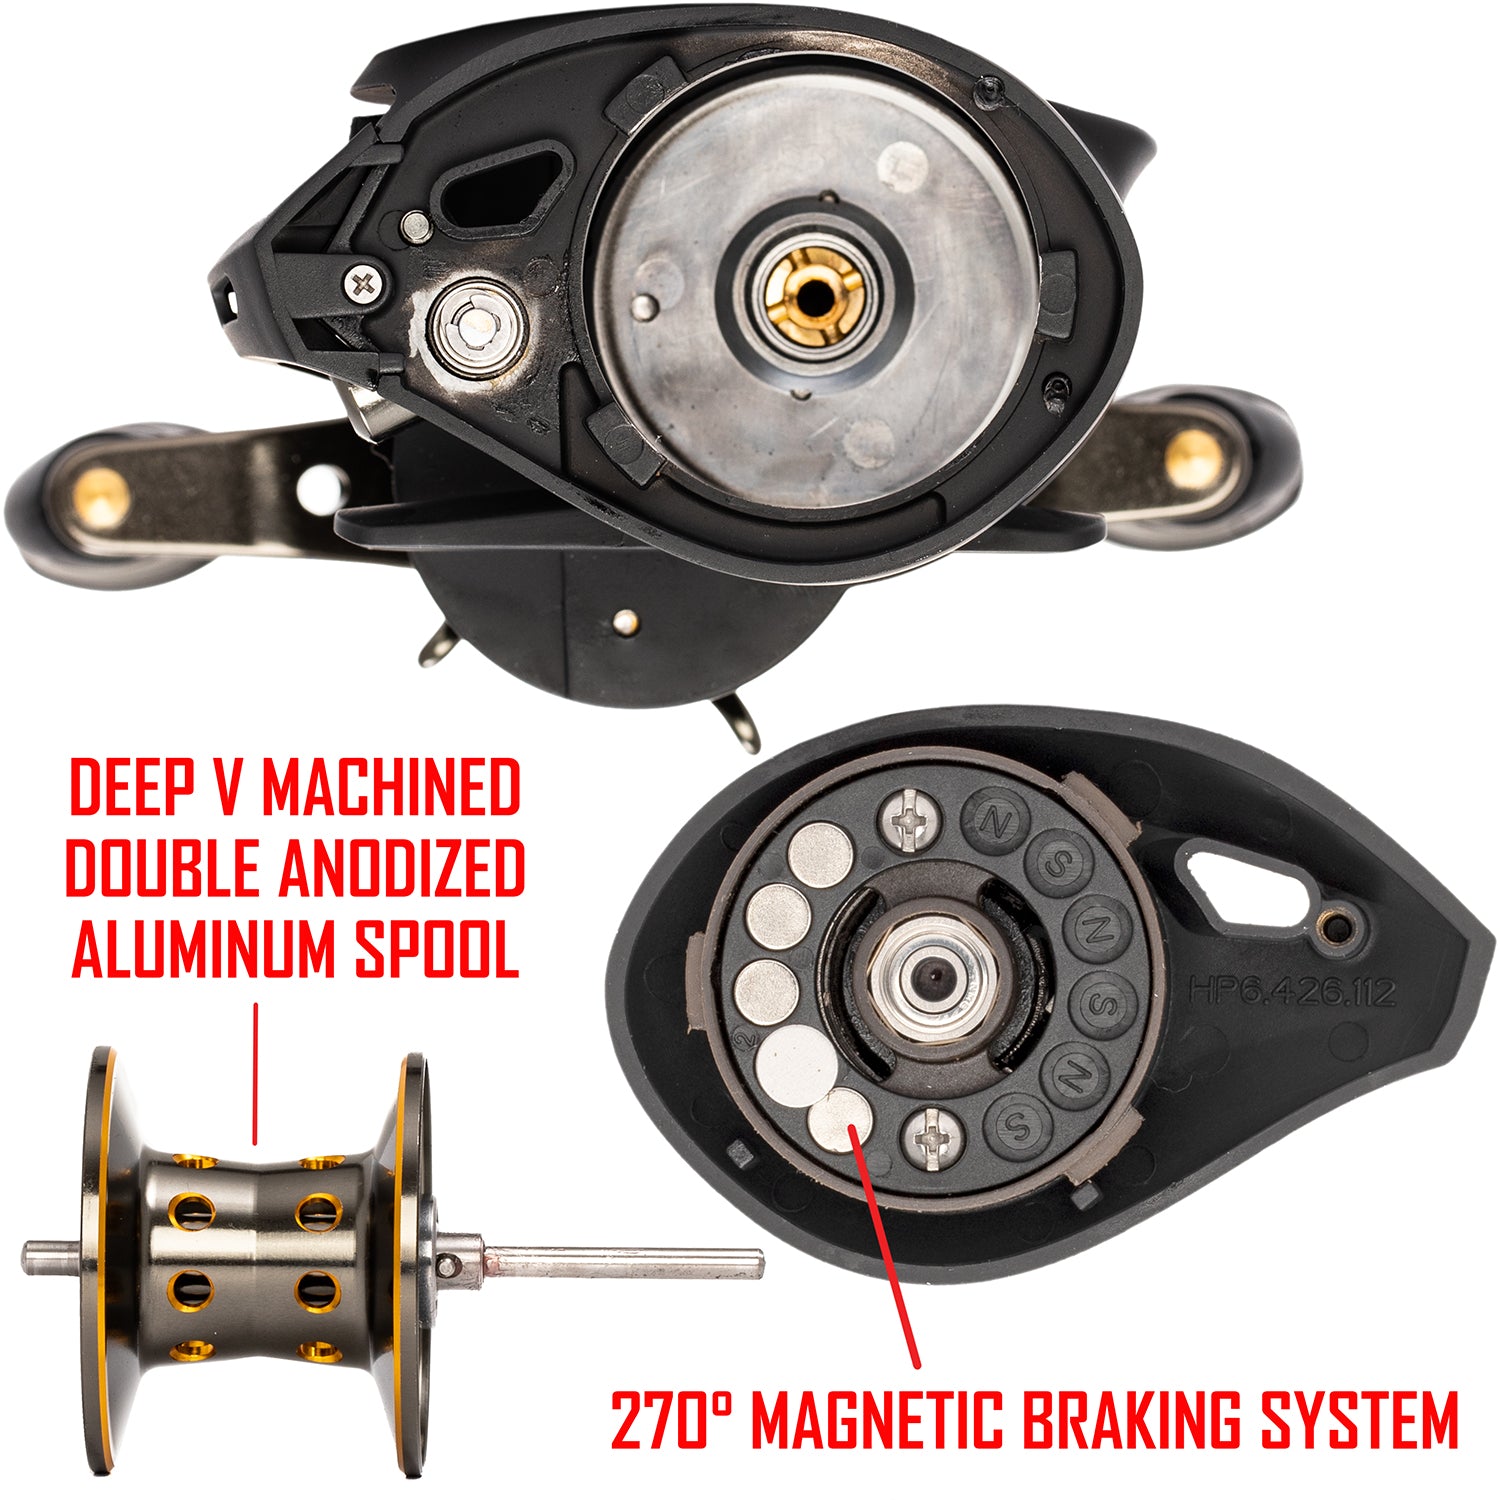 Black APEX TOURNAMENT Baitcaster with red text. text: DEEP V MACHINED DOUBLE ANODIZED ALUMINUM SPOOL 270° MAGNETIC BRAKING SYSTEM